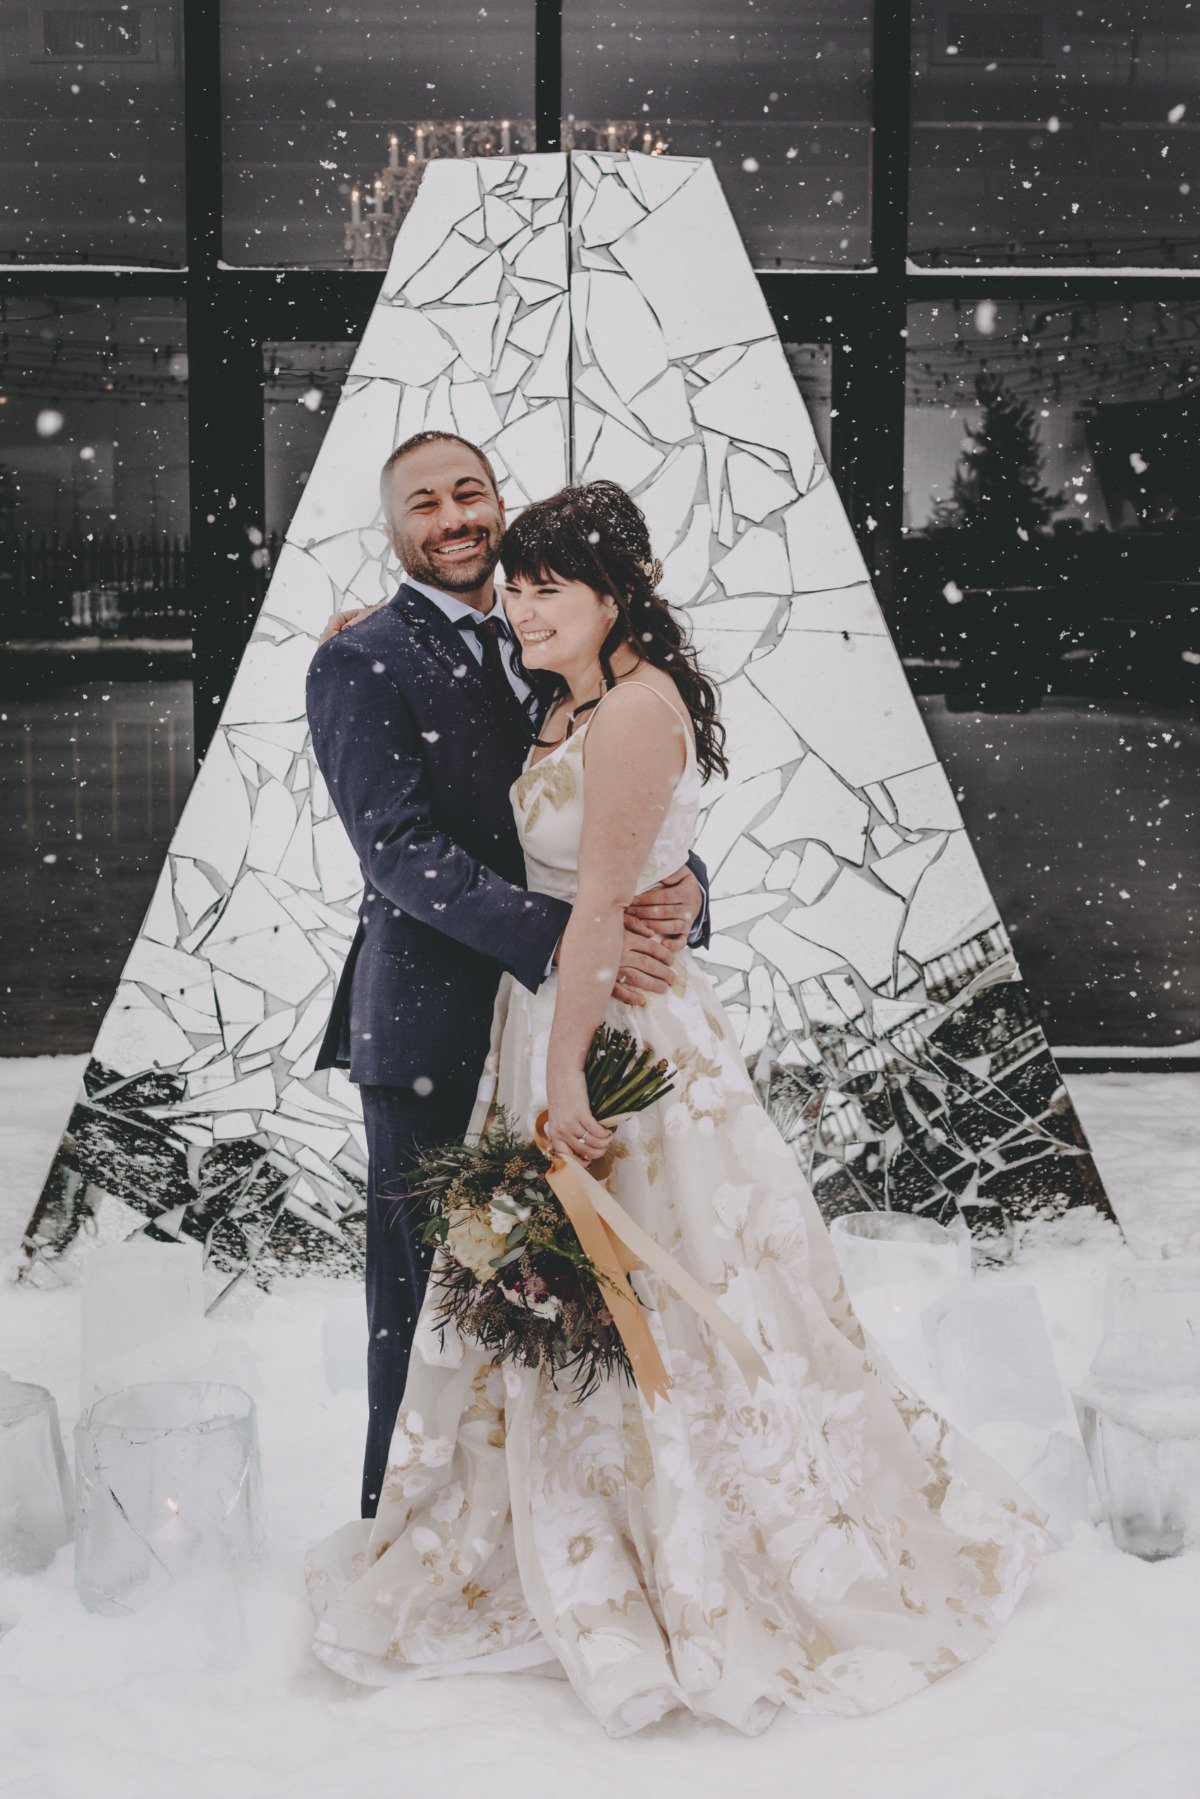 This Super Fun Winter Wedding Will Have You Wishing For Snow